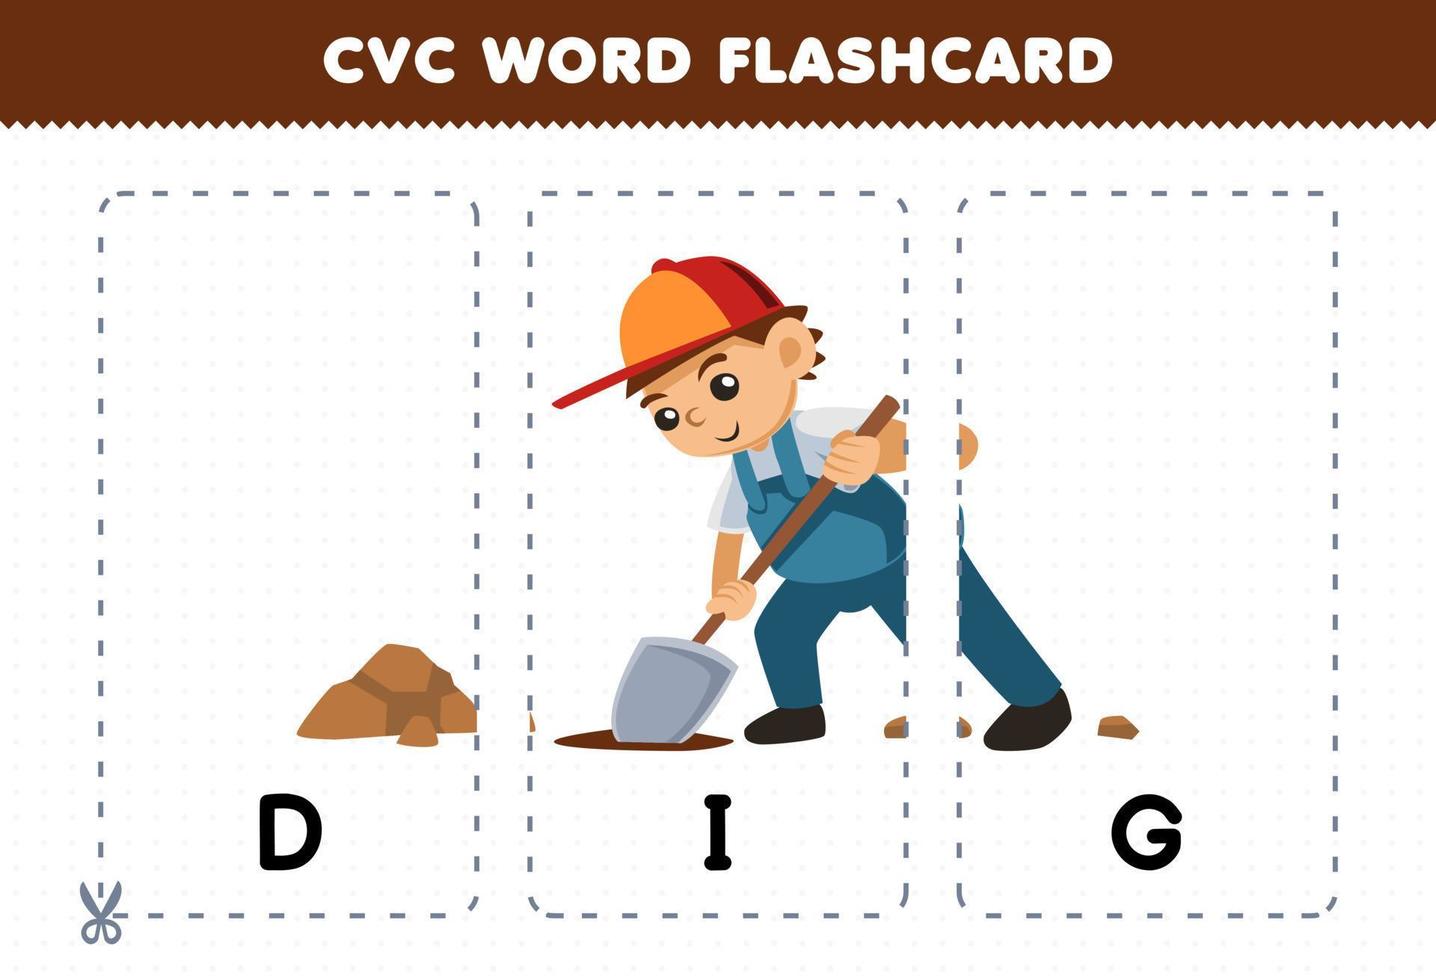 Education game for children learning consonant vowel consonant word with cute cartoon DIG illustration printable flashcard vector